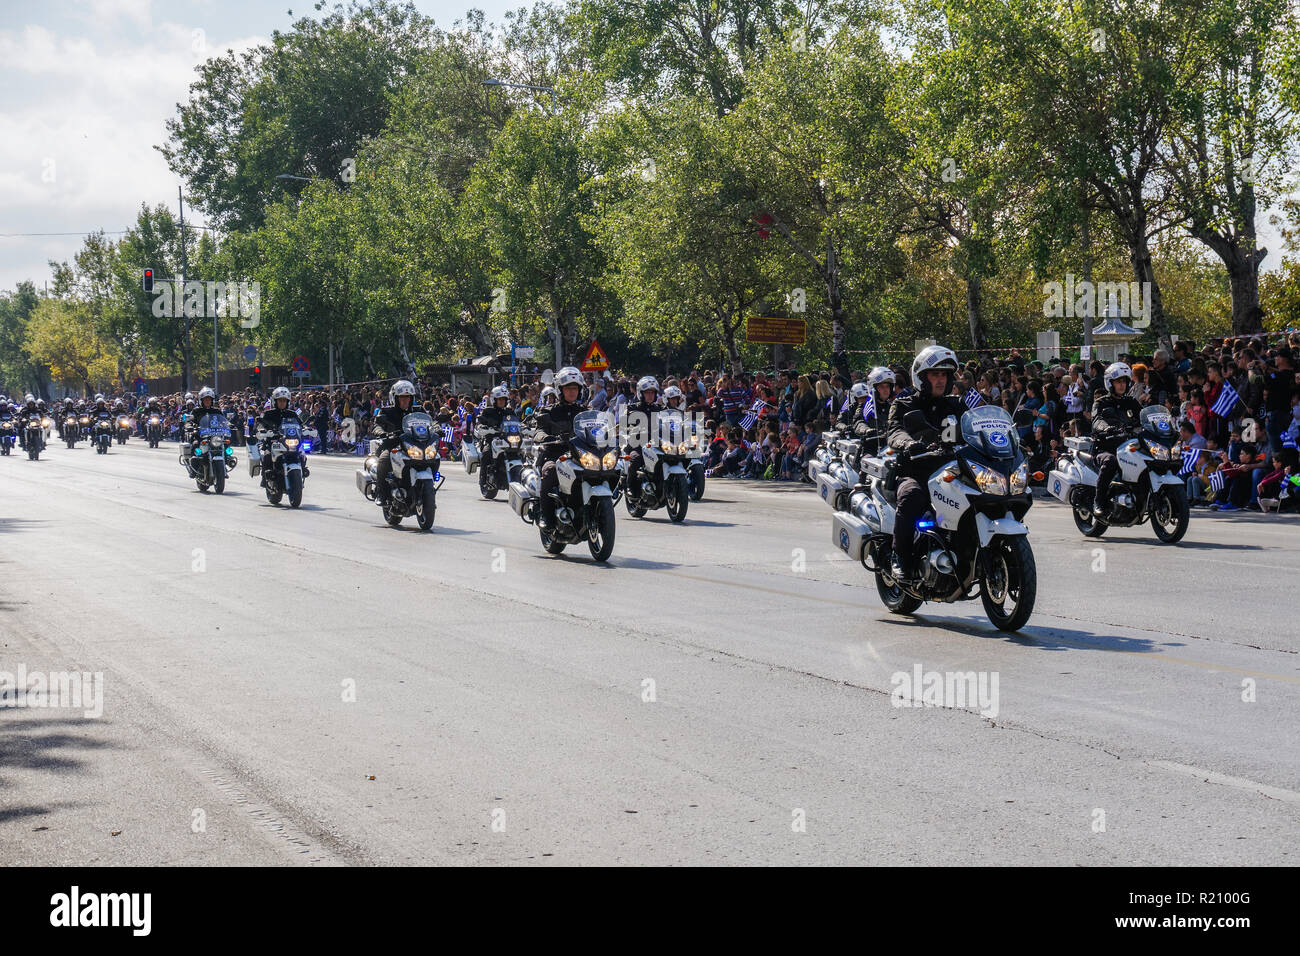 Hellenic Police motorcycles during Oxi Day parade in Thessaloniki, Greece. Greek police - Ellinikii Astynomia Security forces bikes with personnel. Stock Photo